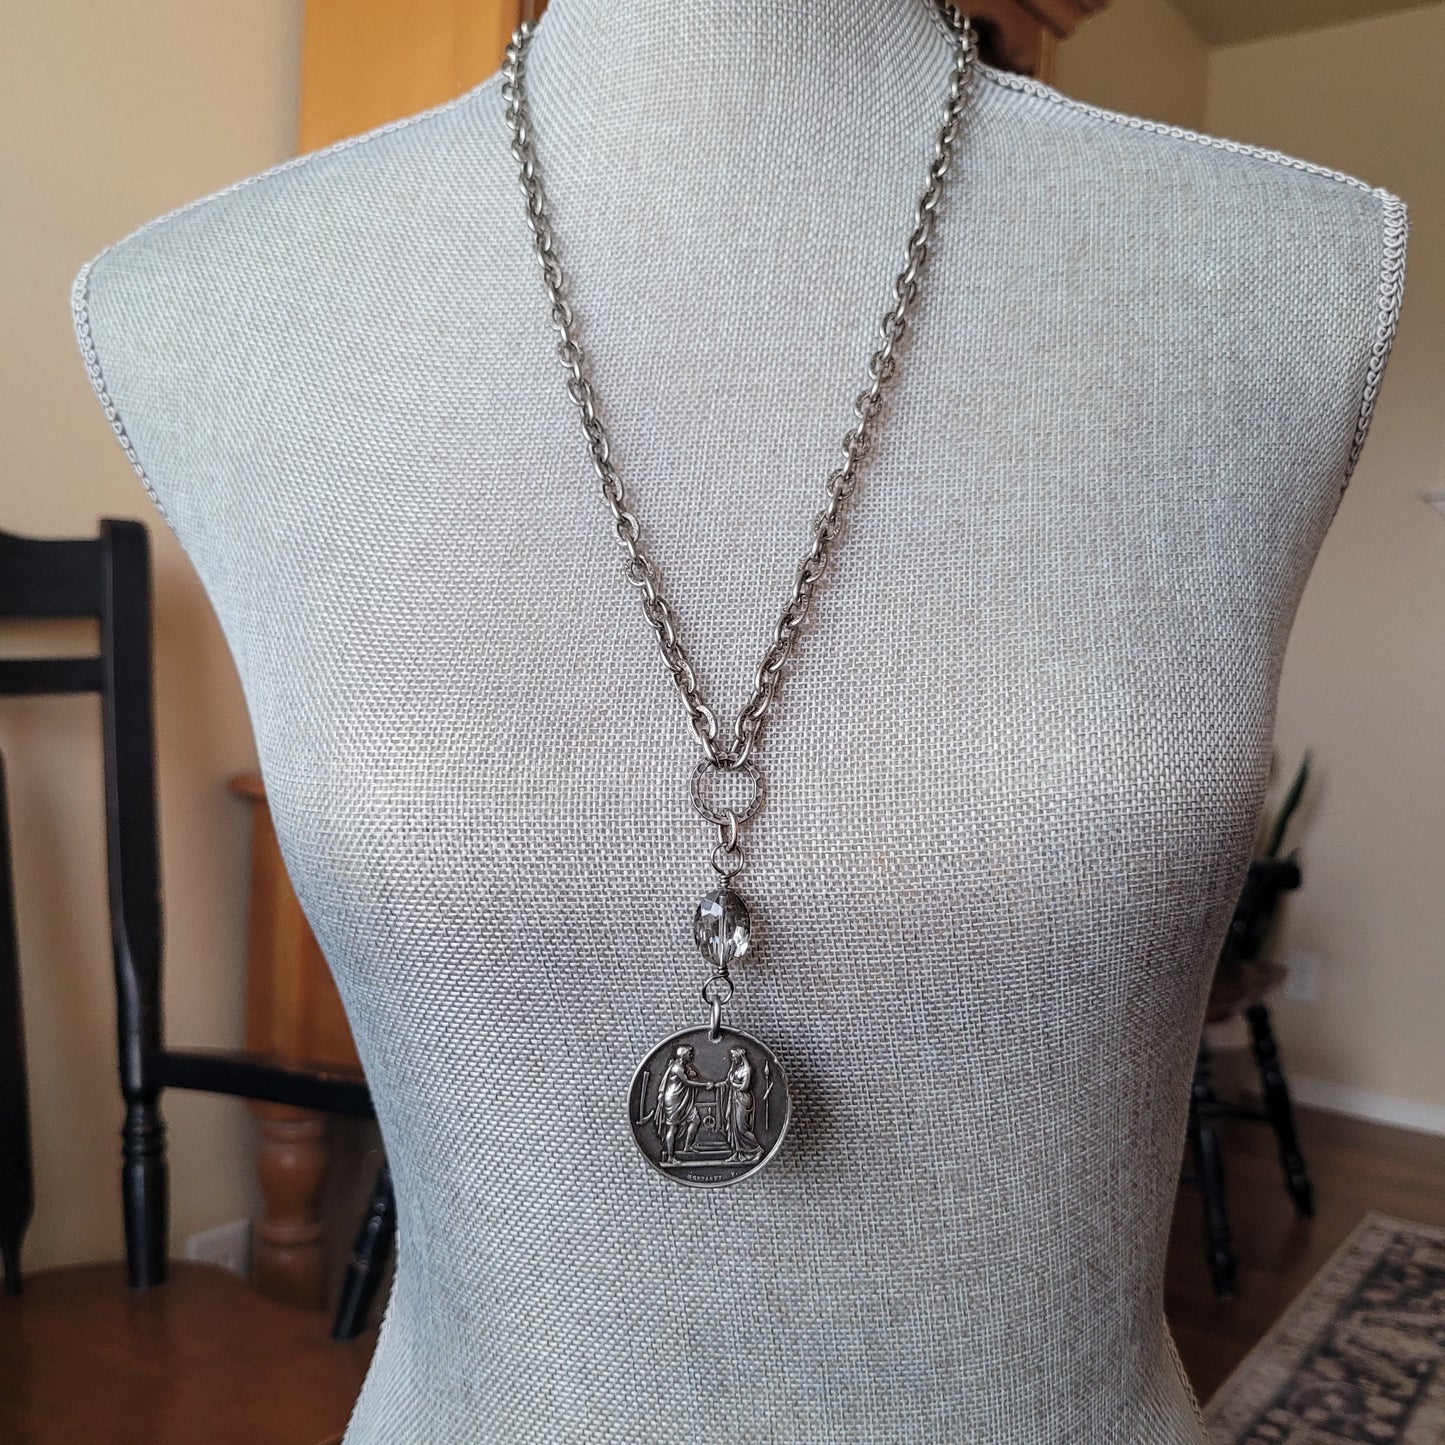 Man and Wife, Vintage French Civil Marriage medallion necklace